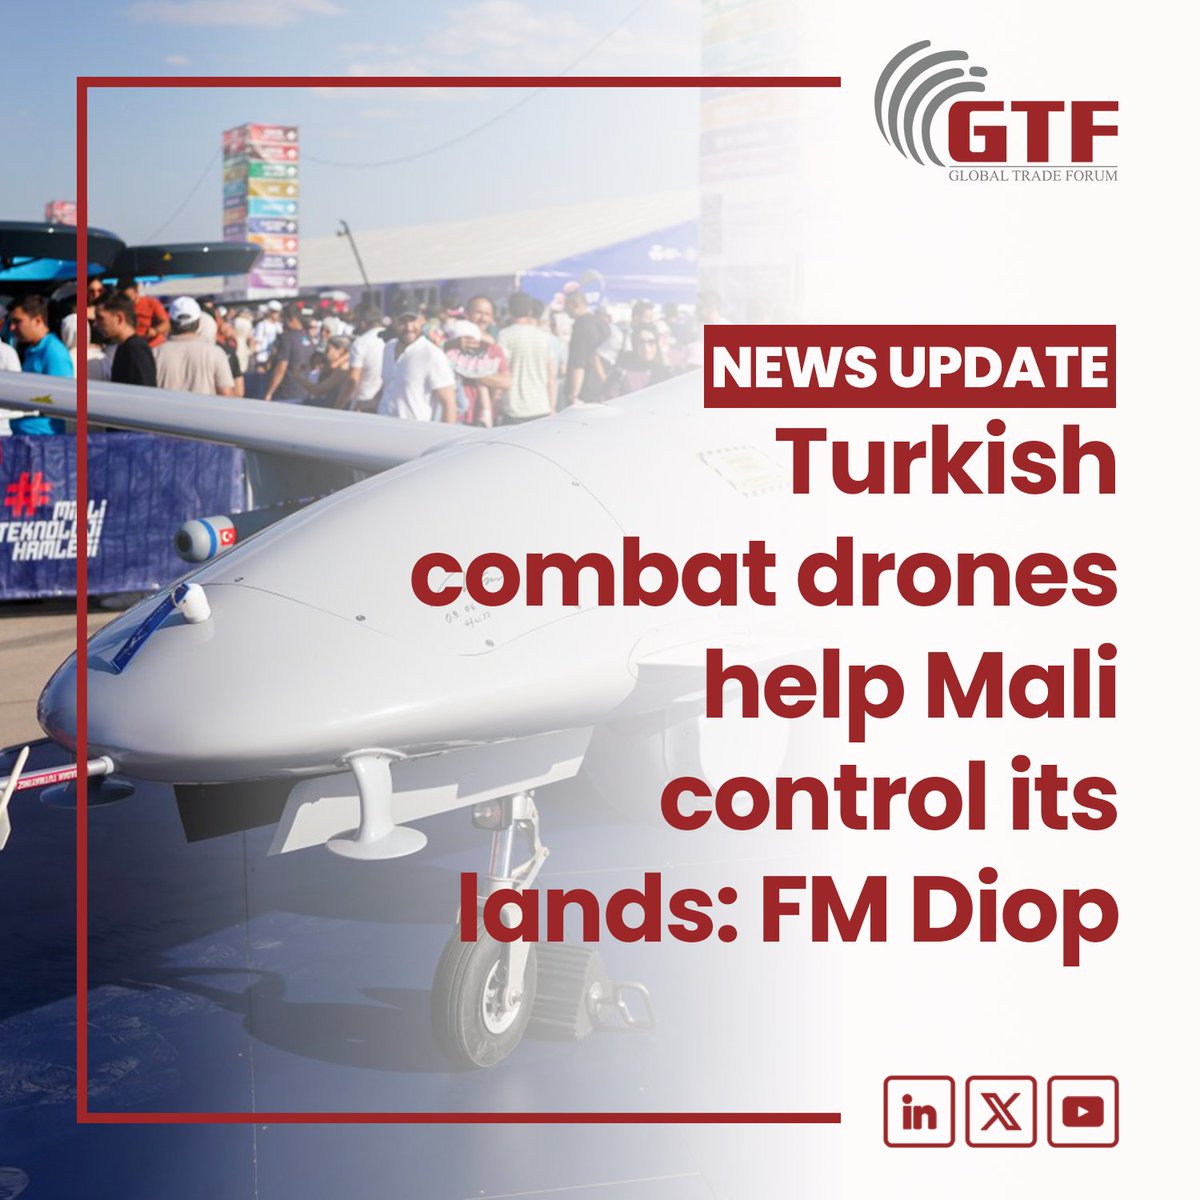 Turkish unmanned combat aerial vehicles (UCAVs) are of great help to Mali in controlling its lands, Malian Minister of Foreign Affairs and International Cooperation Abdoulaye Diop said.

#TürkiyeTrade #GTF2024 #GlobalTradeForum #EUTradeRelations #EuropeEconomy #TradeDiplomacy